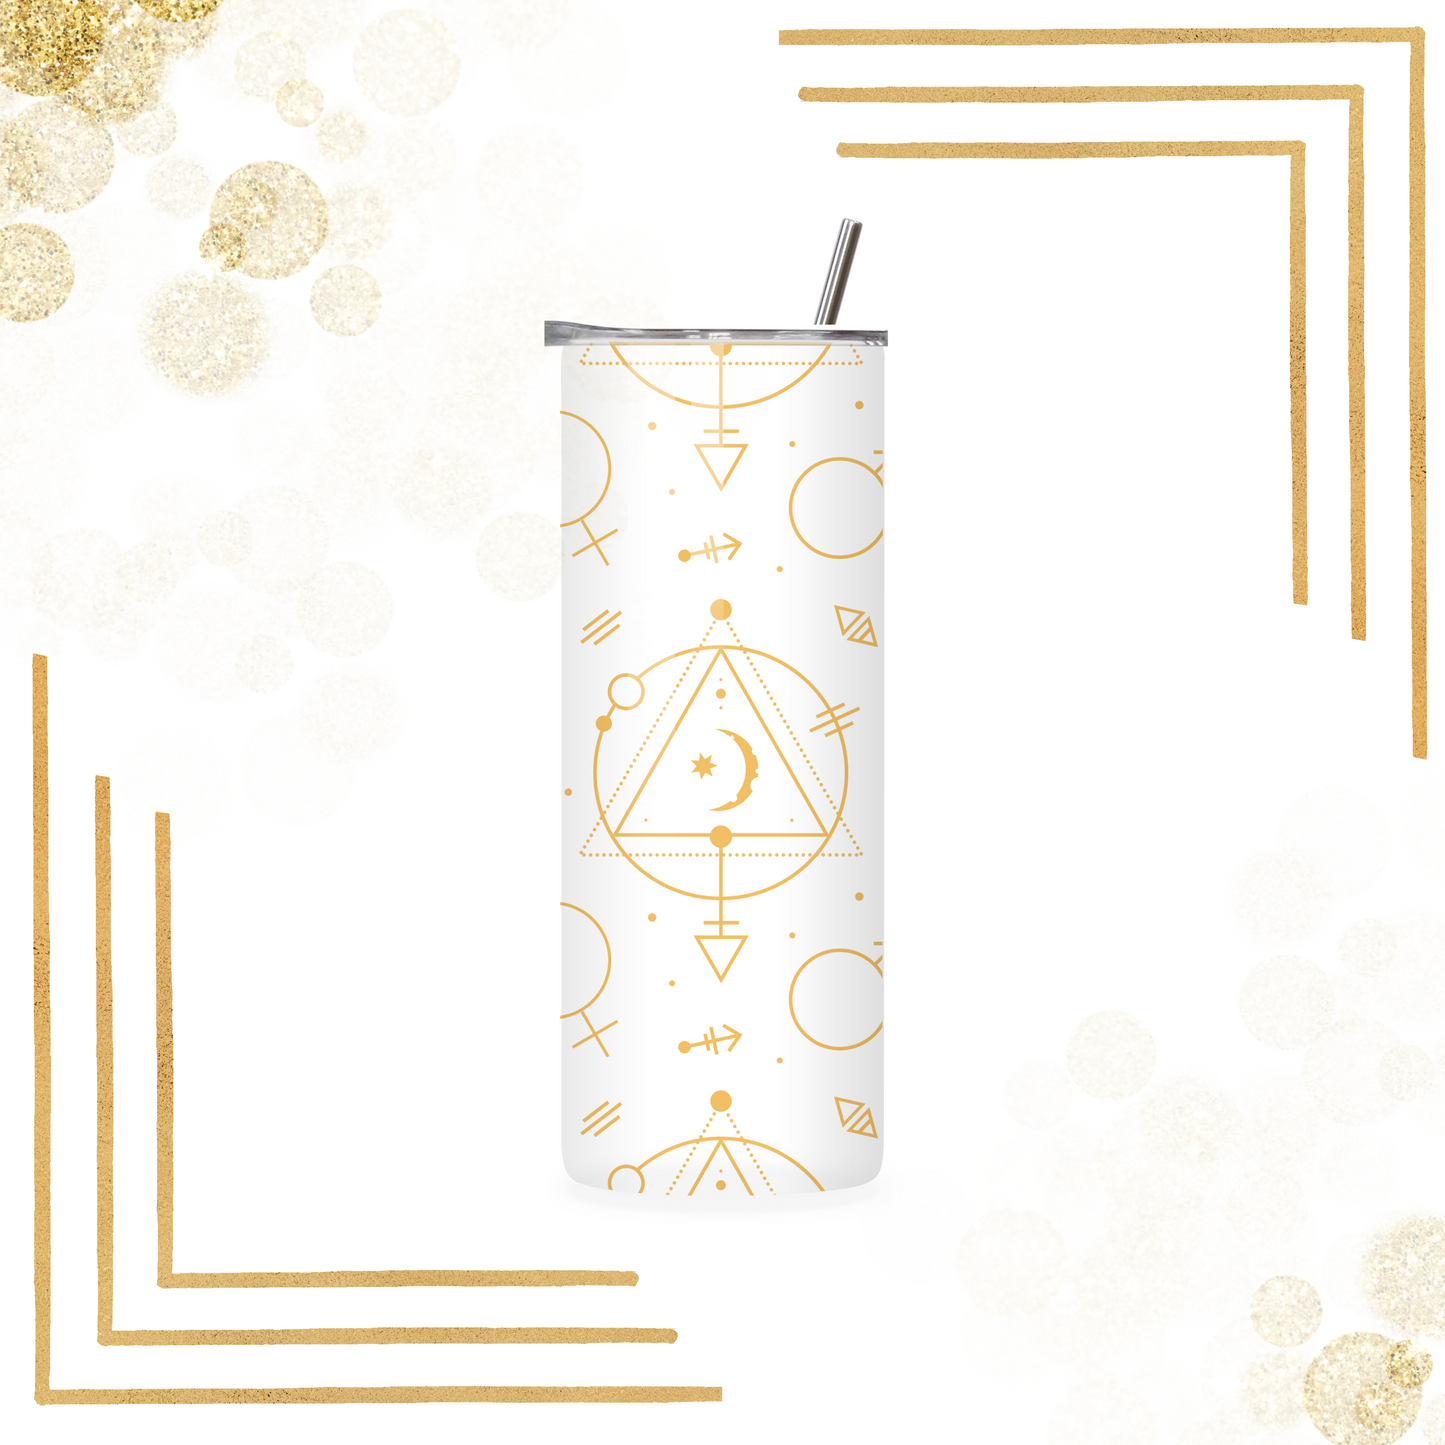 Celestial white and gold tumbler, astrological 